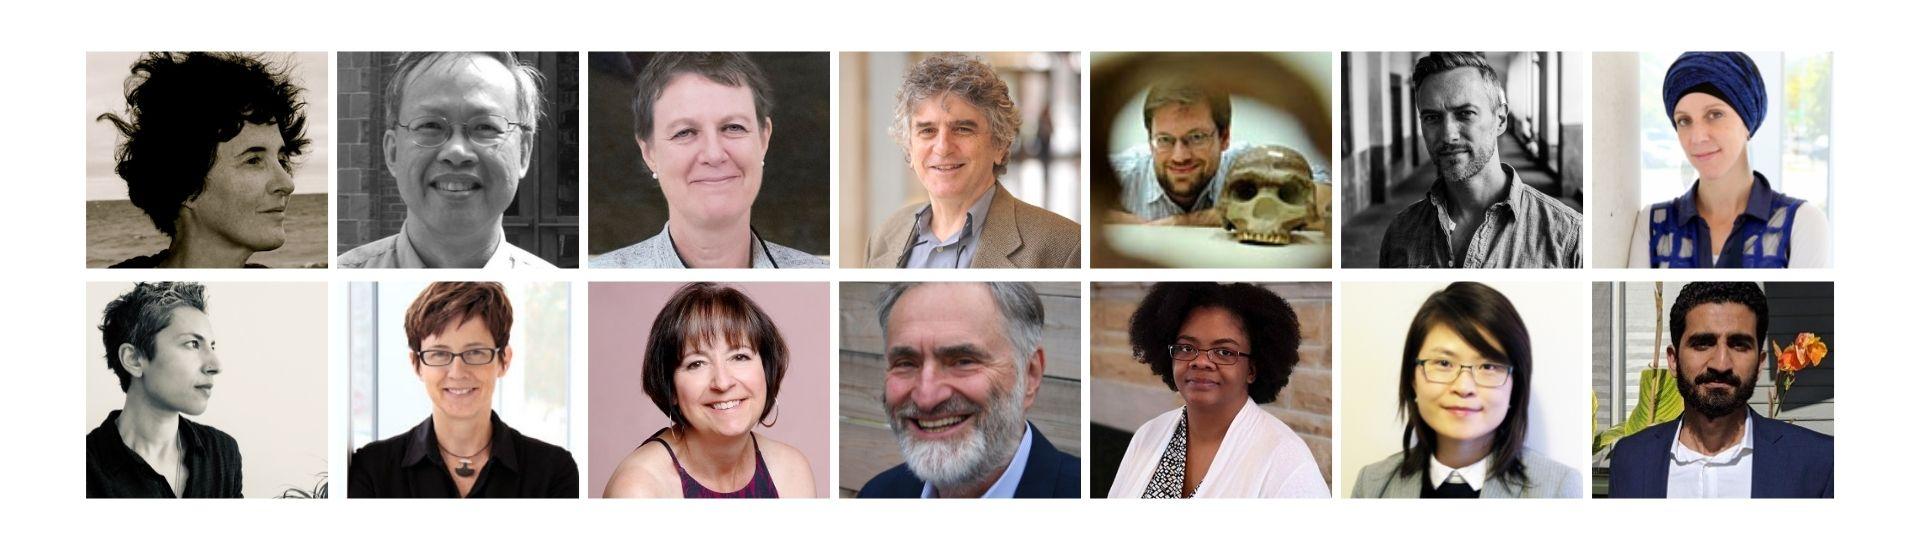 Snapshots of fourteen faculty members from the Department of Anthropology